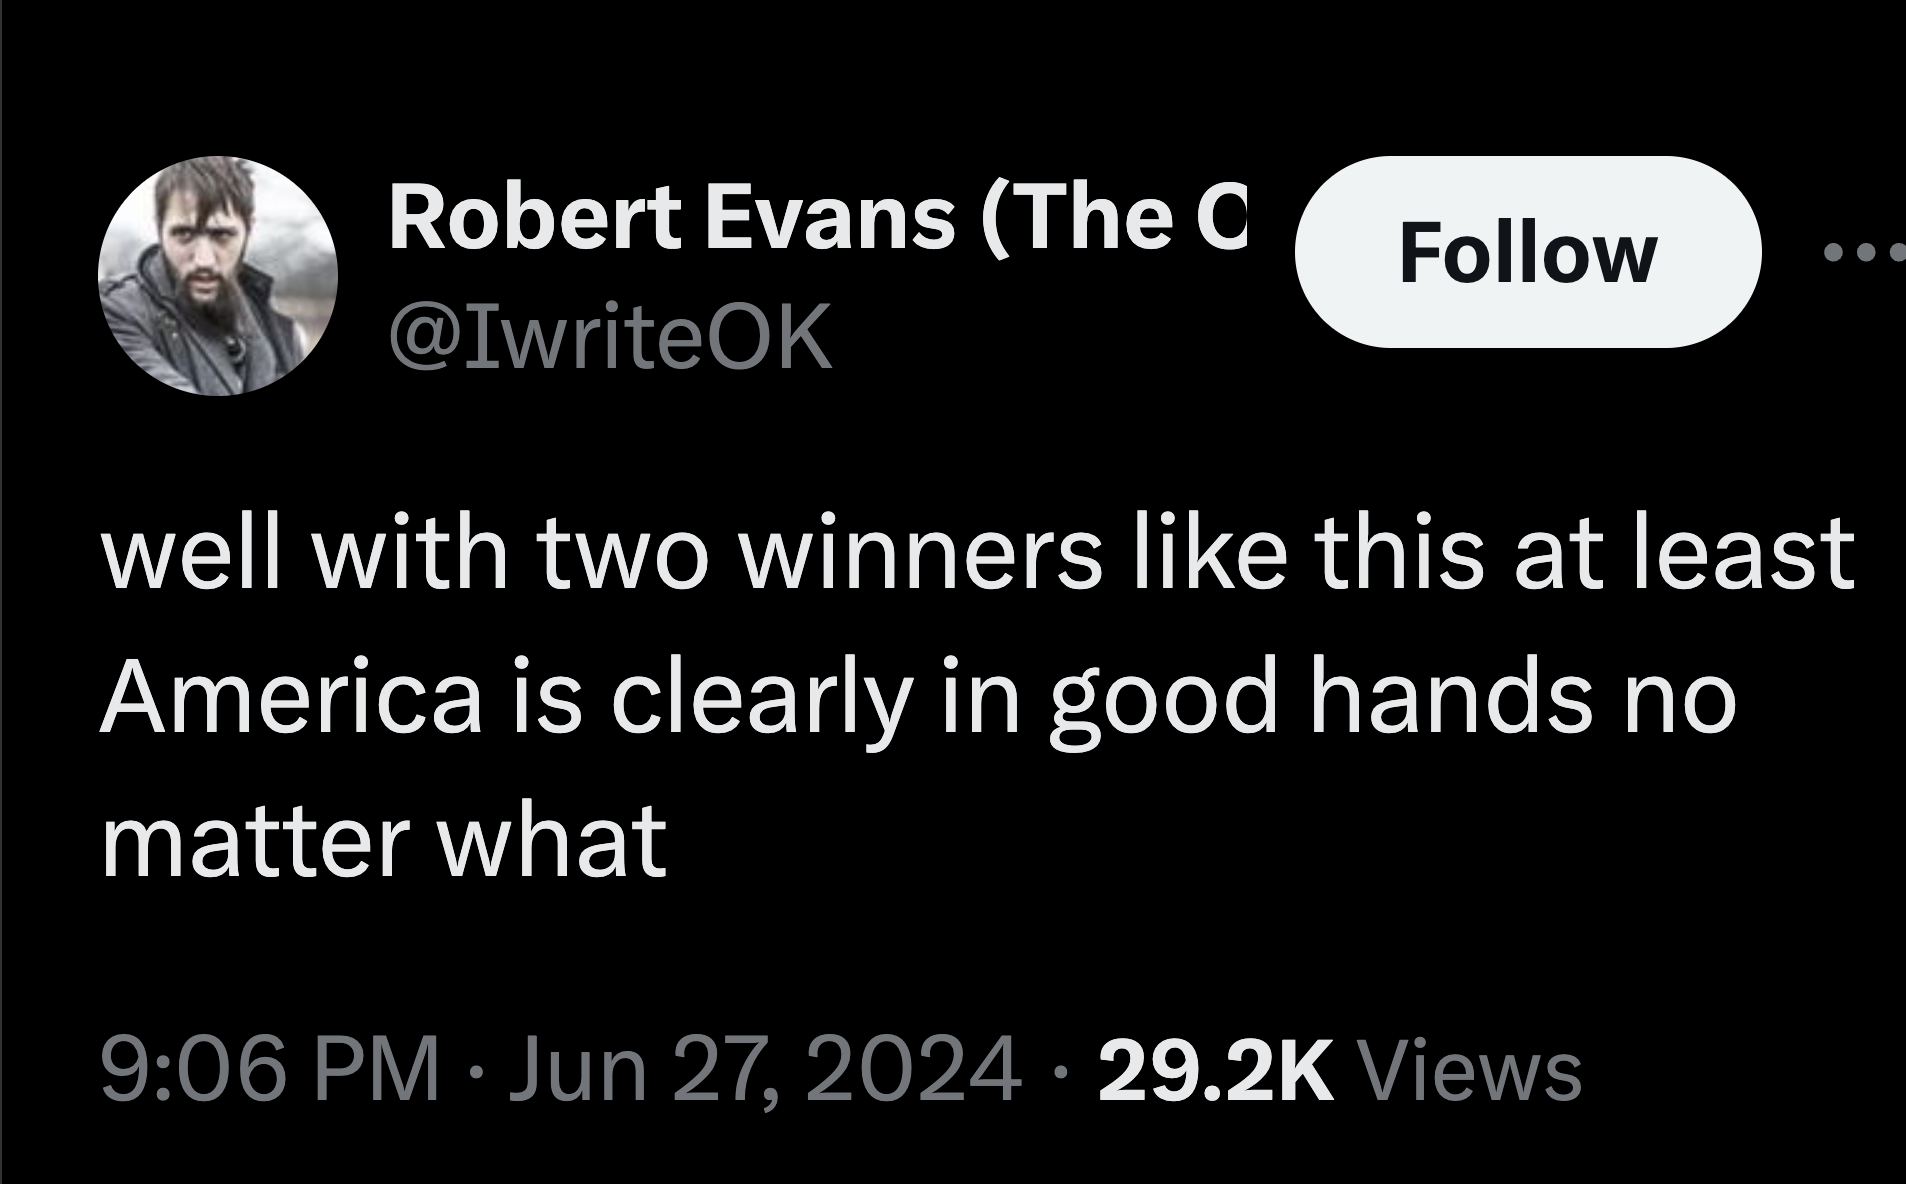 parallel - Robert Evans The C well with two winners this at least America is clearly in good hands no matter what Views